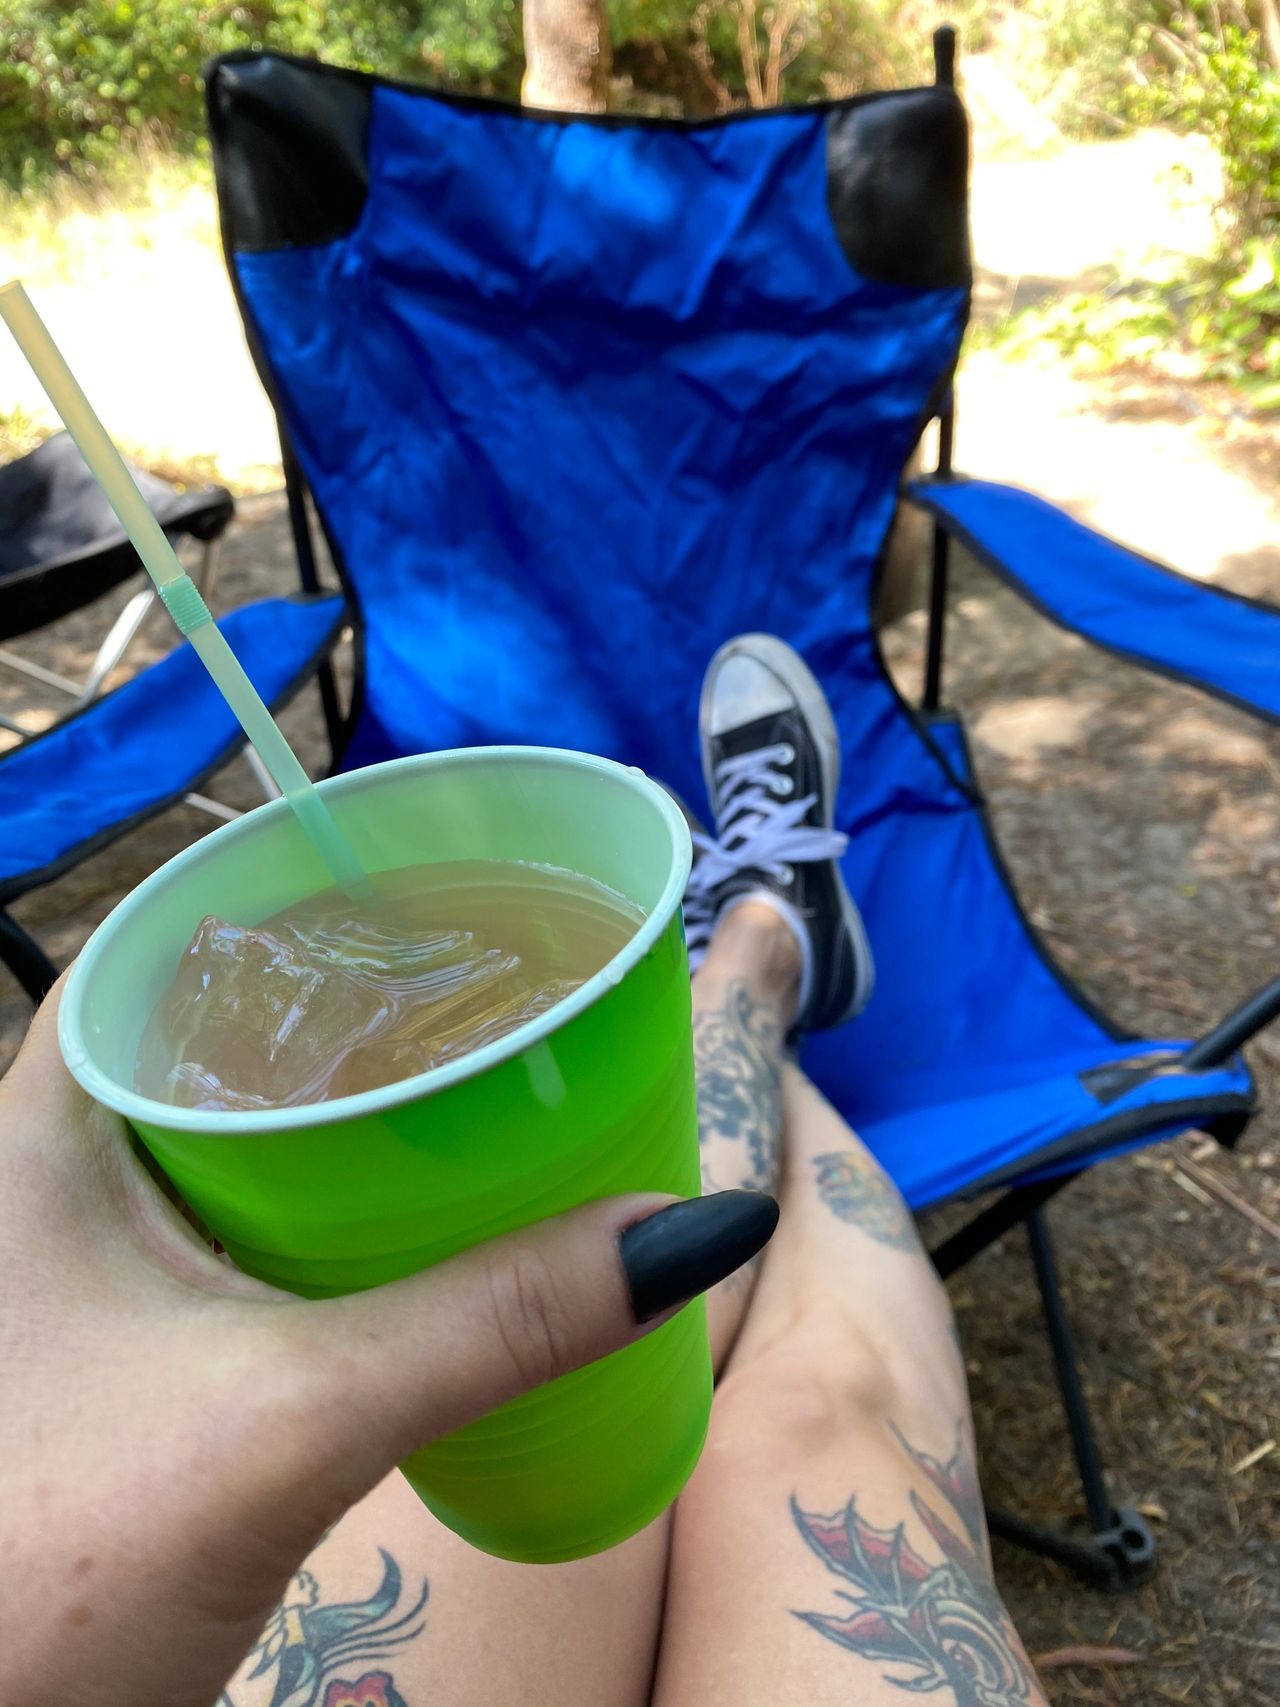 Rewarded with a Salty Dog cocktail for surviving the hike.